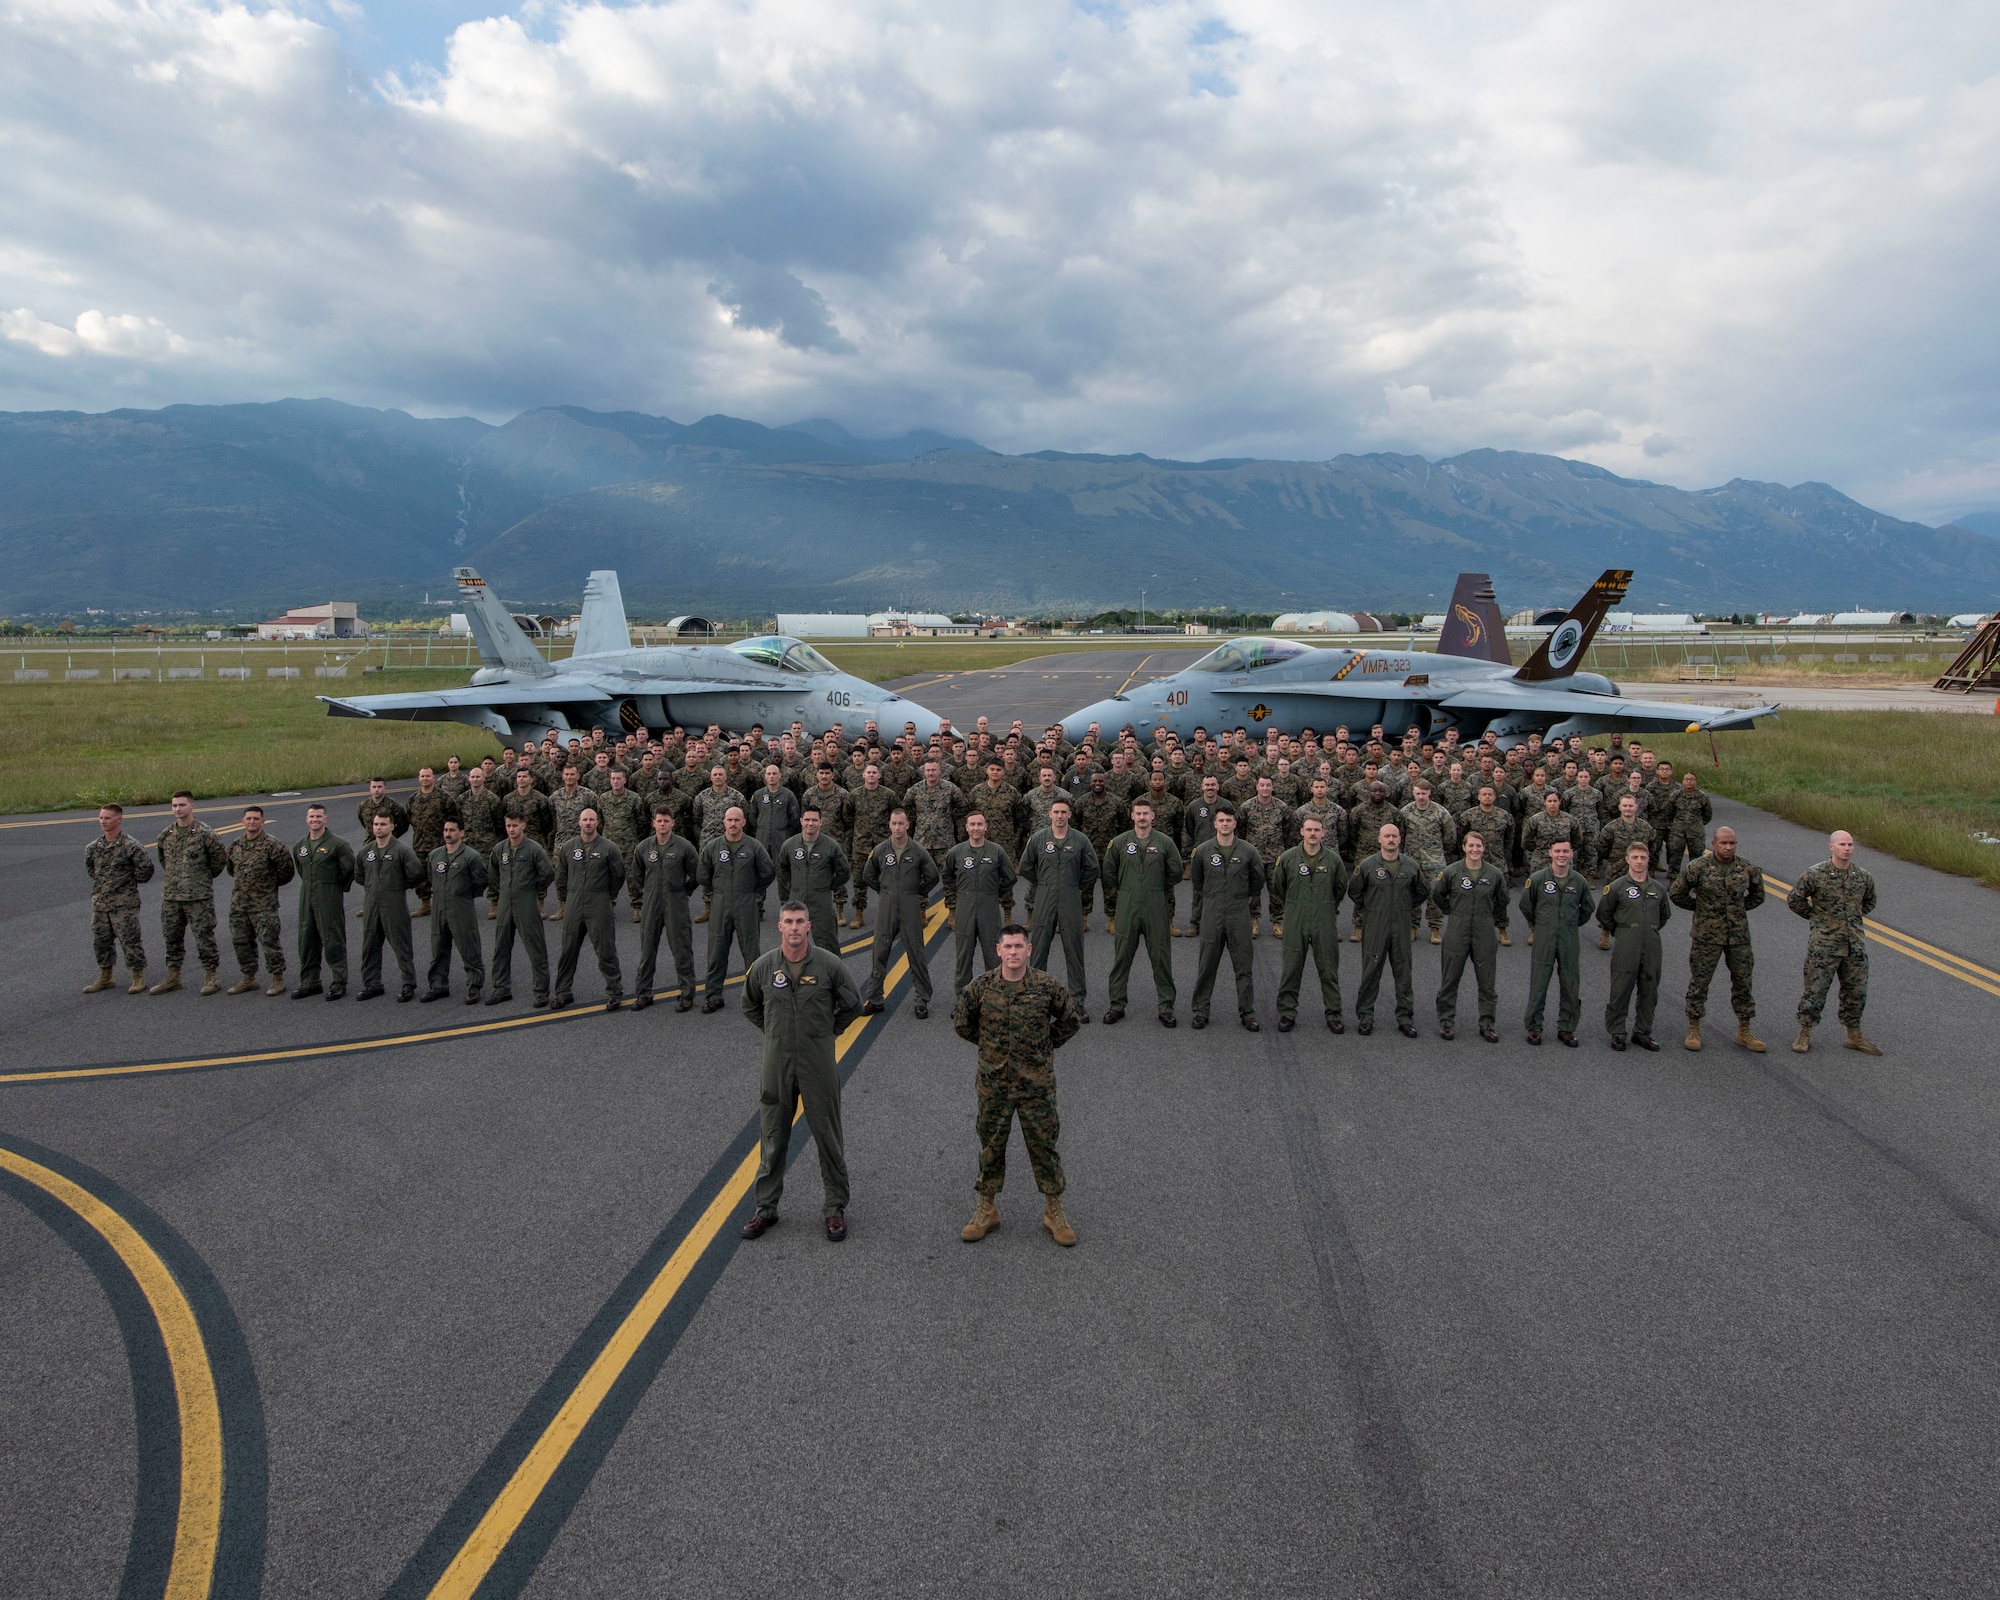 United States Marines assigned to the Marine Fighter Attack Squadron 323 out of Marine Corps Air Station Miramar, California, pose for a photo at Aviano Air Base, Italy, Sept. 22, 2022. More than 200 U.S. Marines were deployed to Aviano Air Base, Italy, for approximately two months to integrate and train with the 510th Fighter Squadron as part of a dynamic force employment. (U.S. Air Force photo by Senior Airman Brooke Moeder)